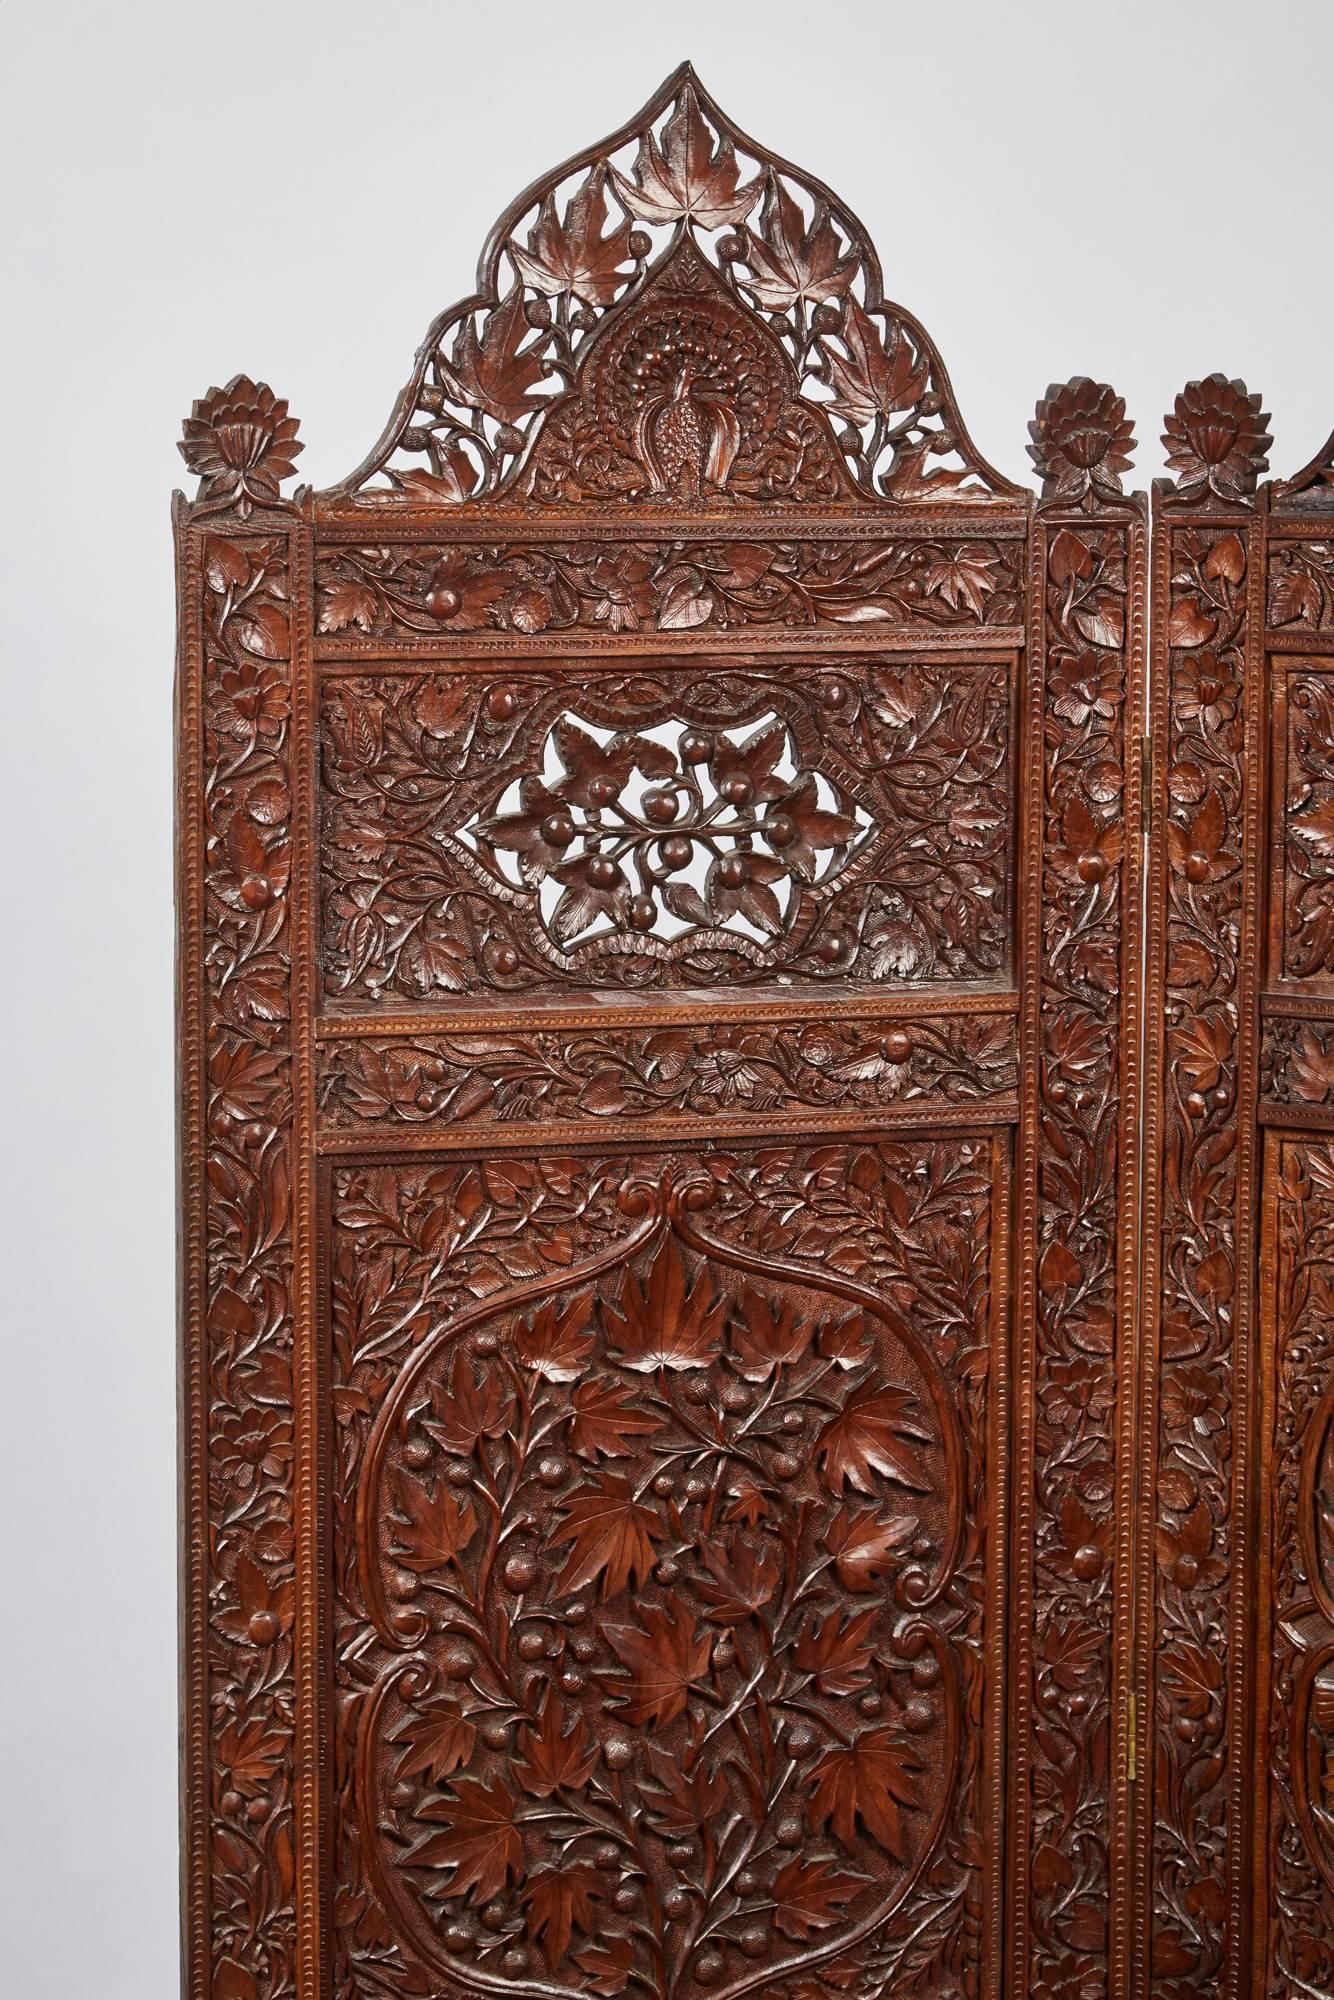 A stunning three-panel Indian screen with elaborate and decorative carvings of foliage design. Each panel has a beautifully carved peacock in the top pediment.